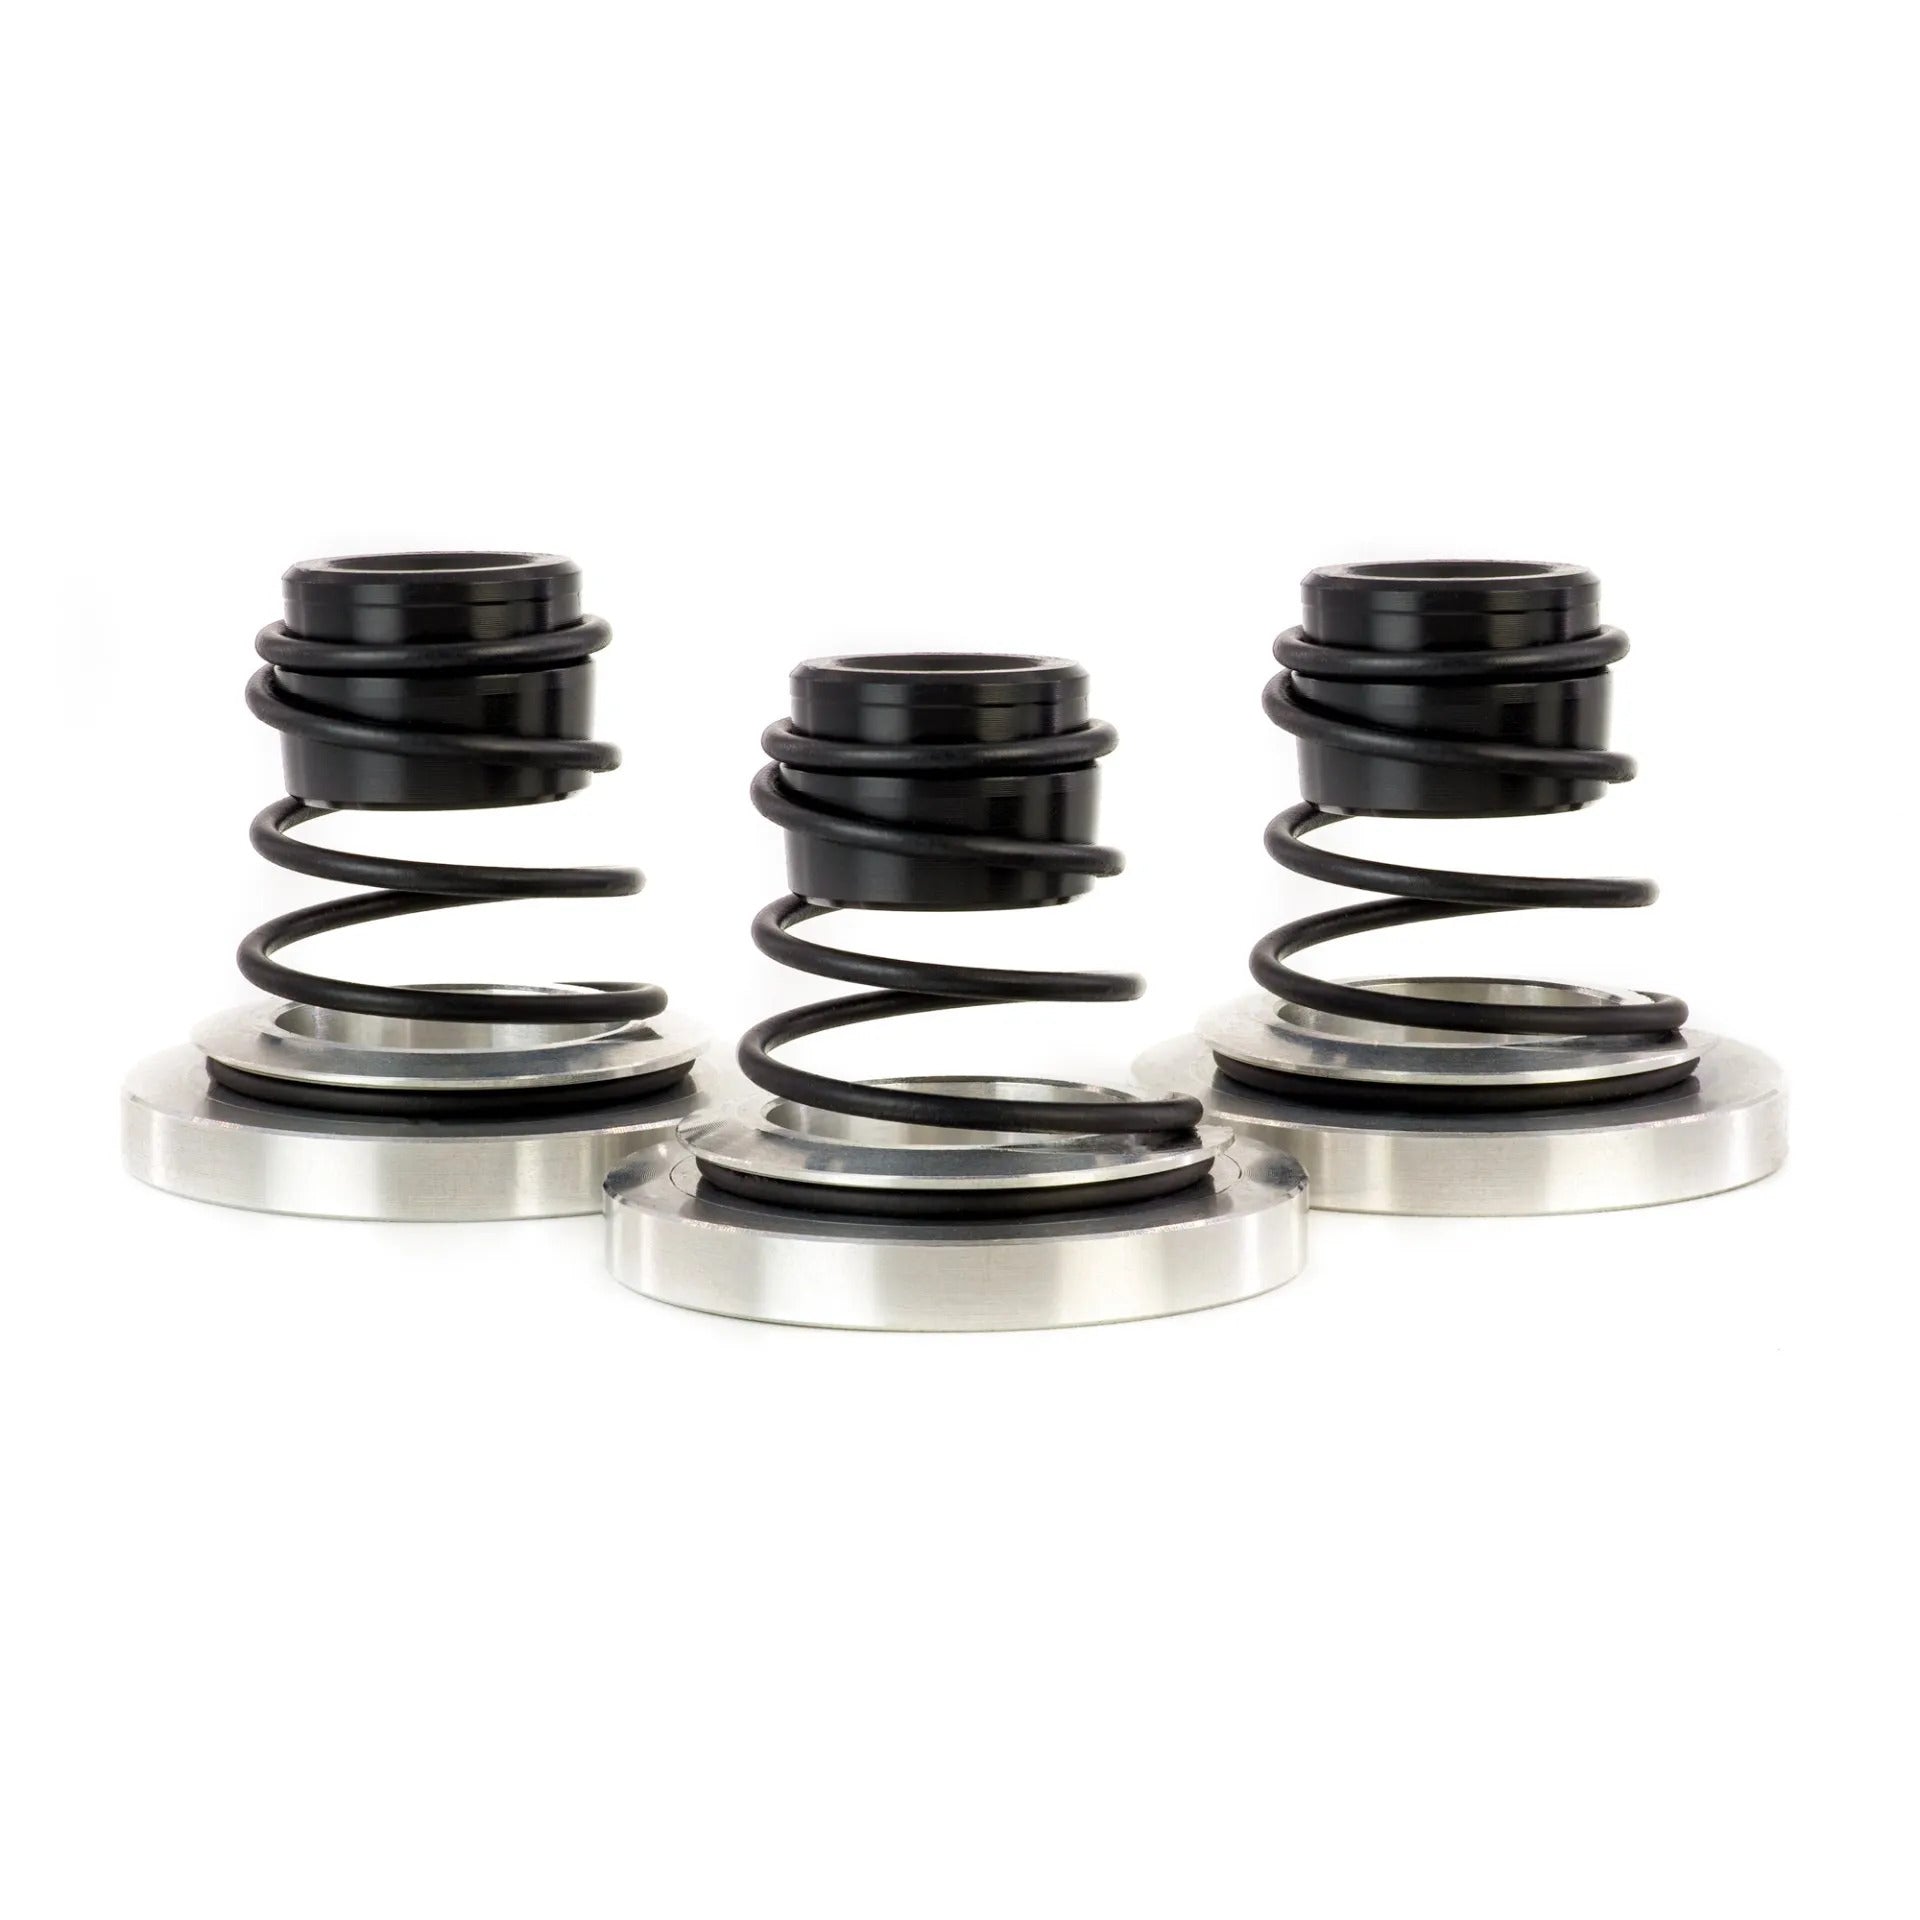 Michell Coated Suspension Springs (set of 3)